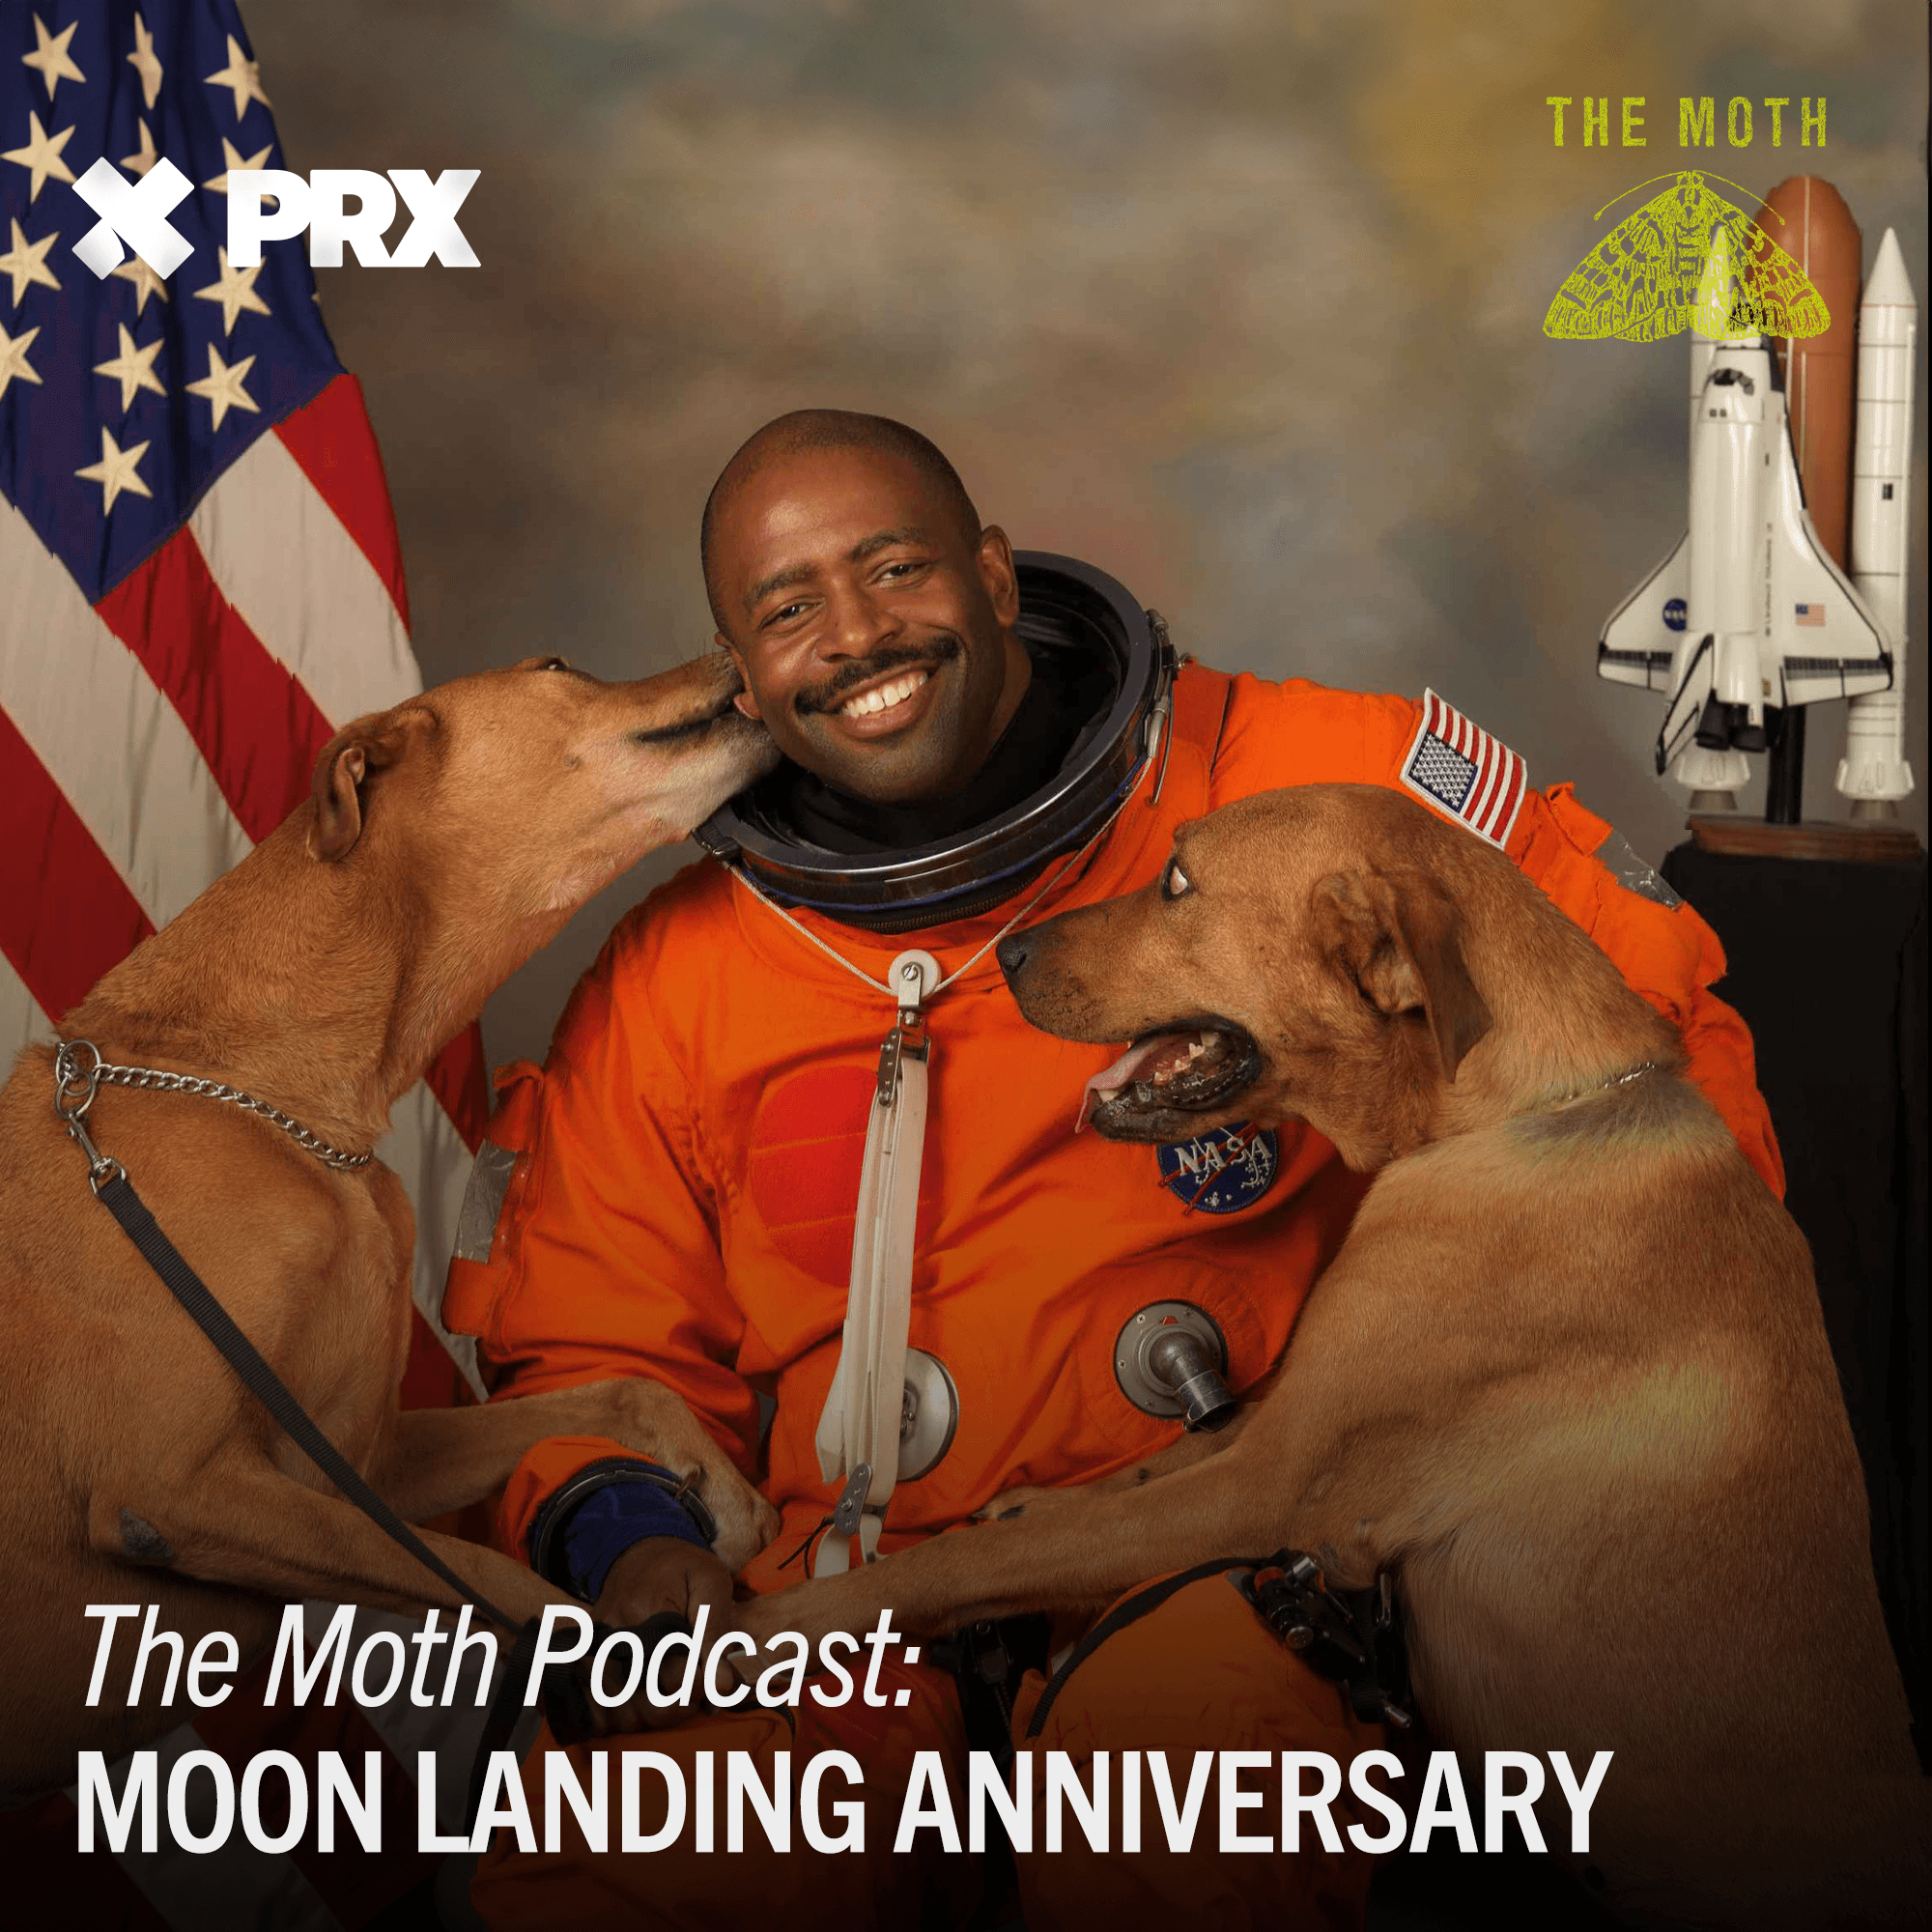 Thumbnail for "The Moth Podcast: Moon Landing Anniversary".